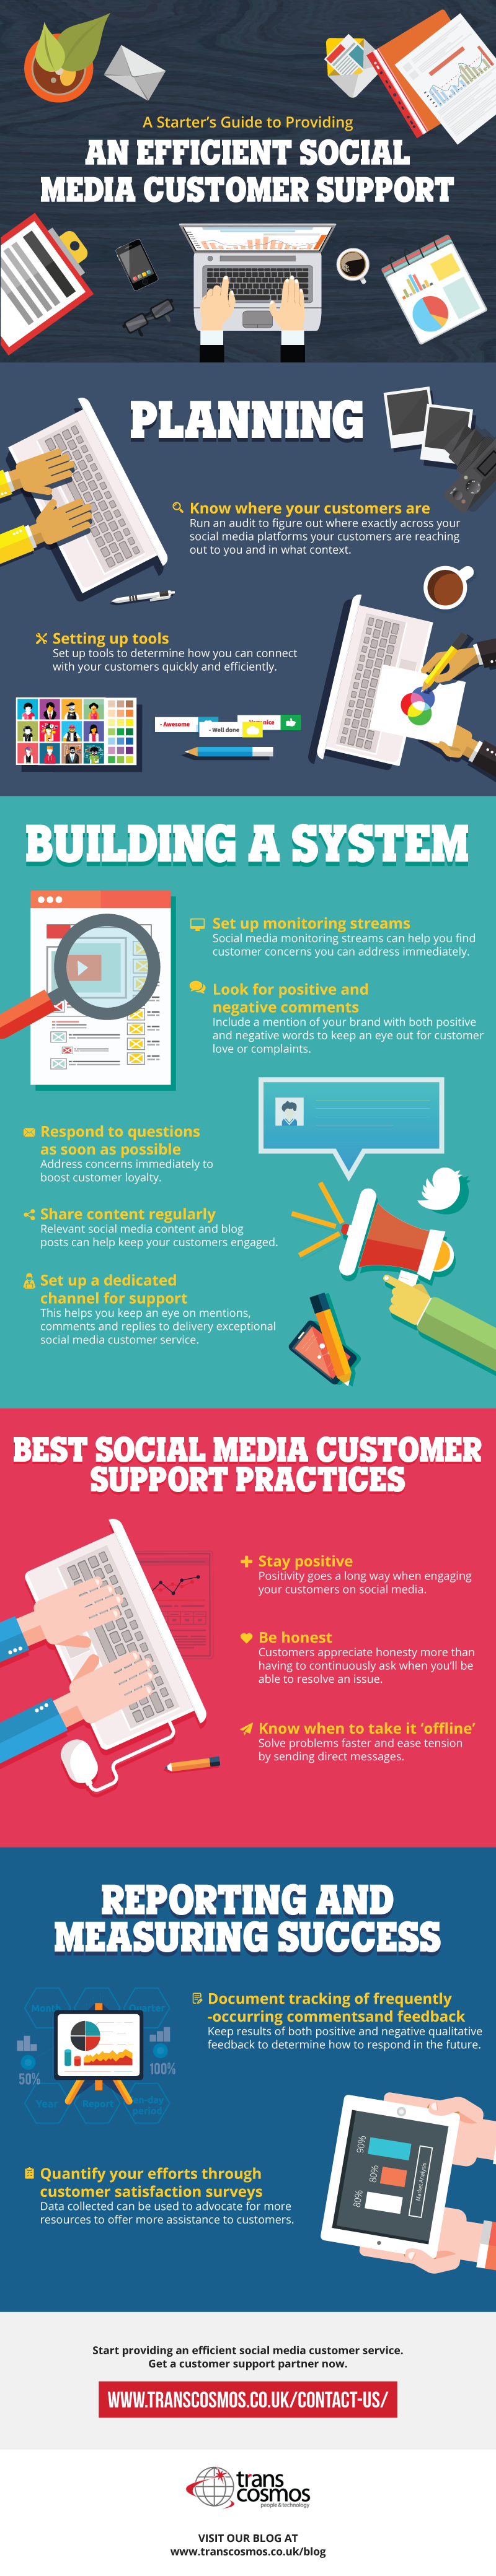 customer support for social media infographic